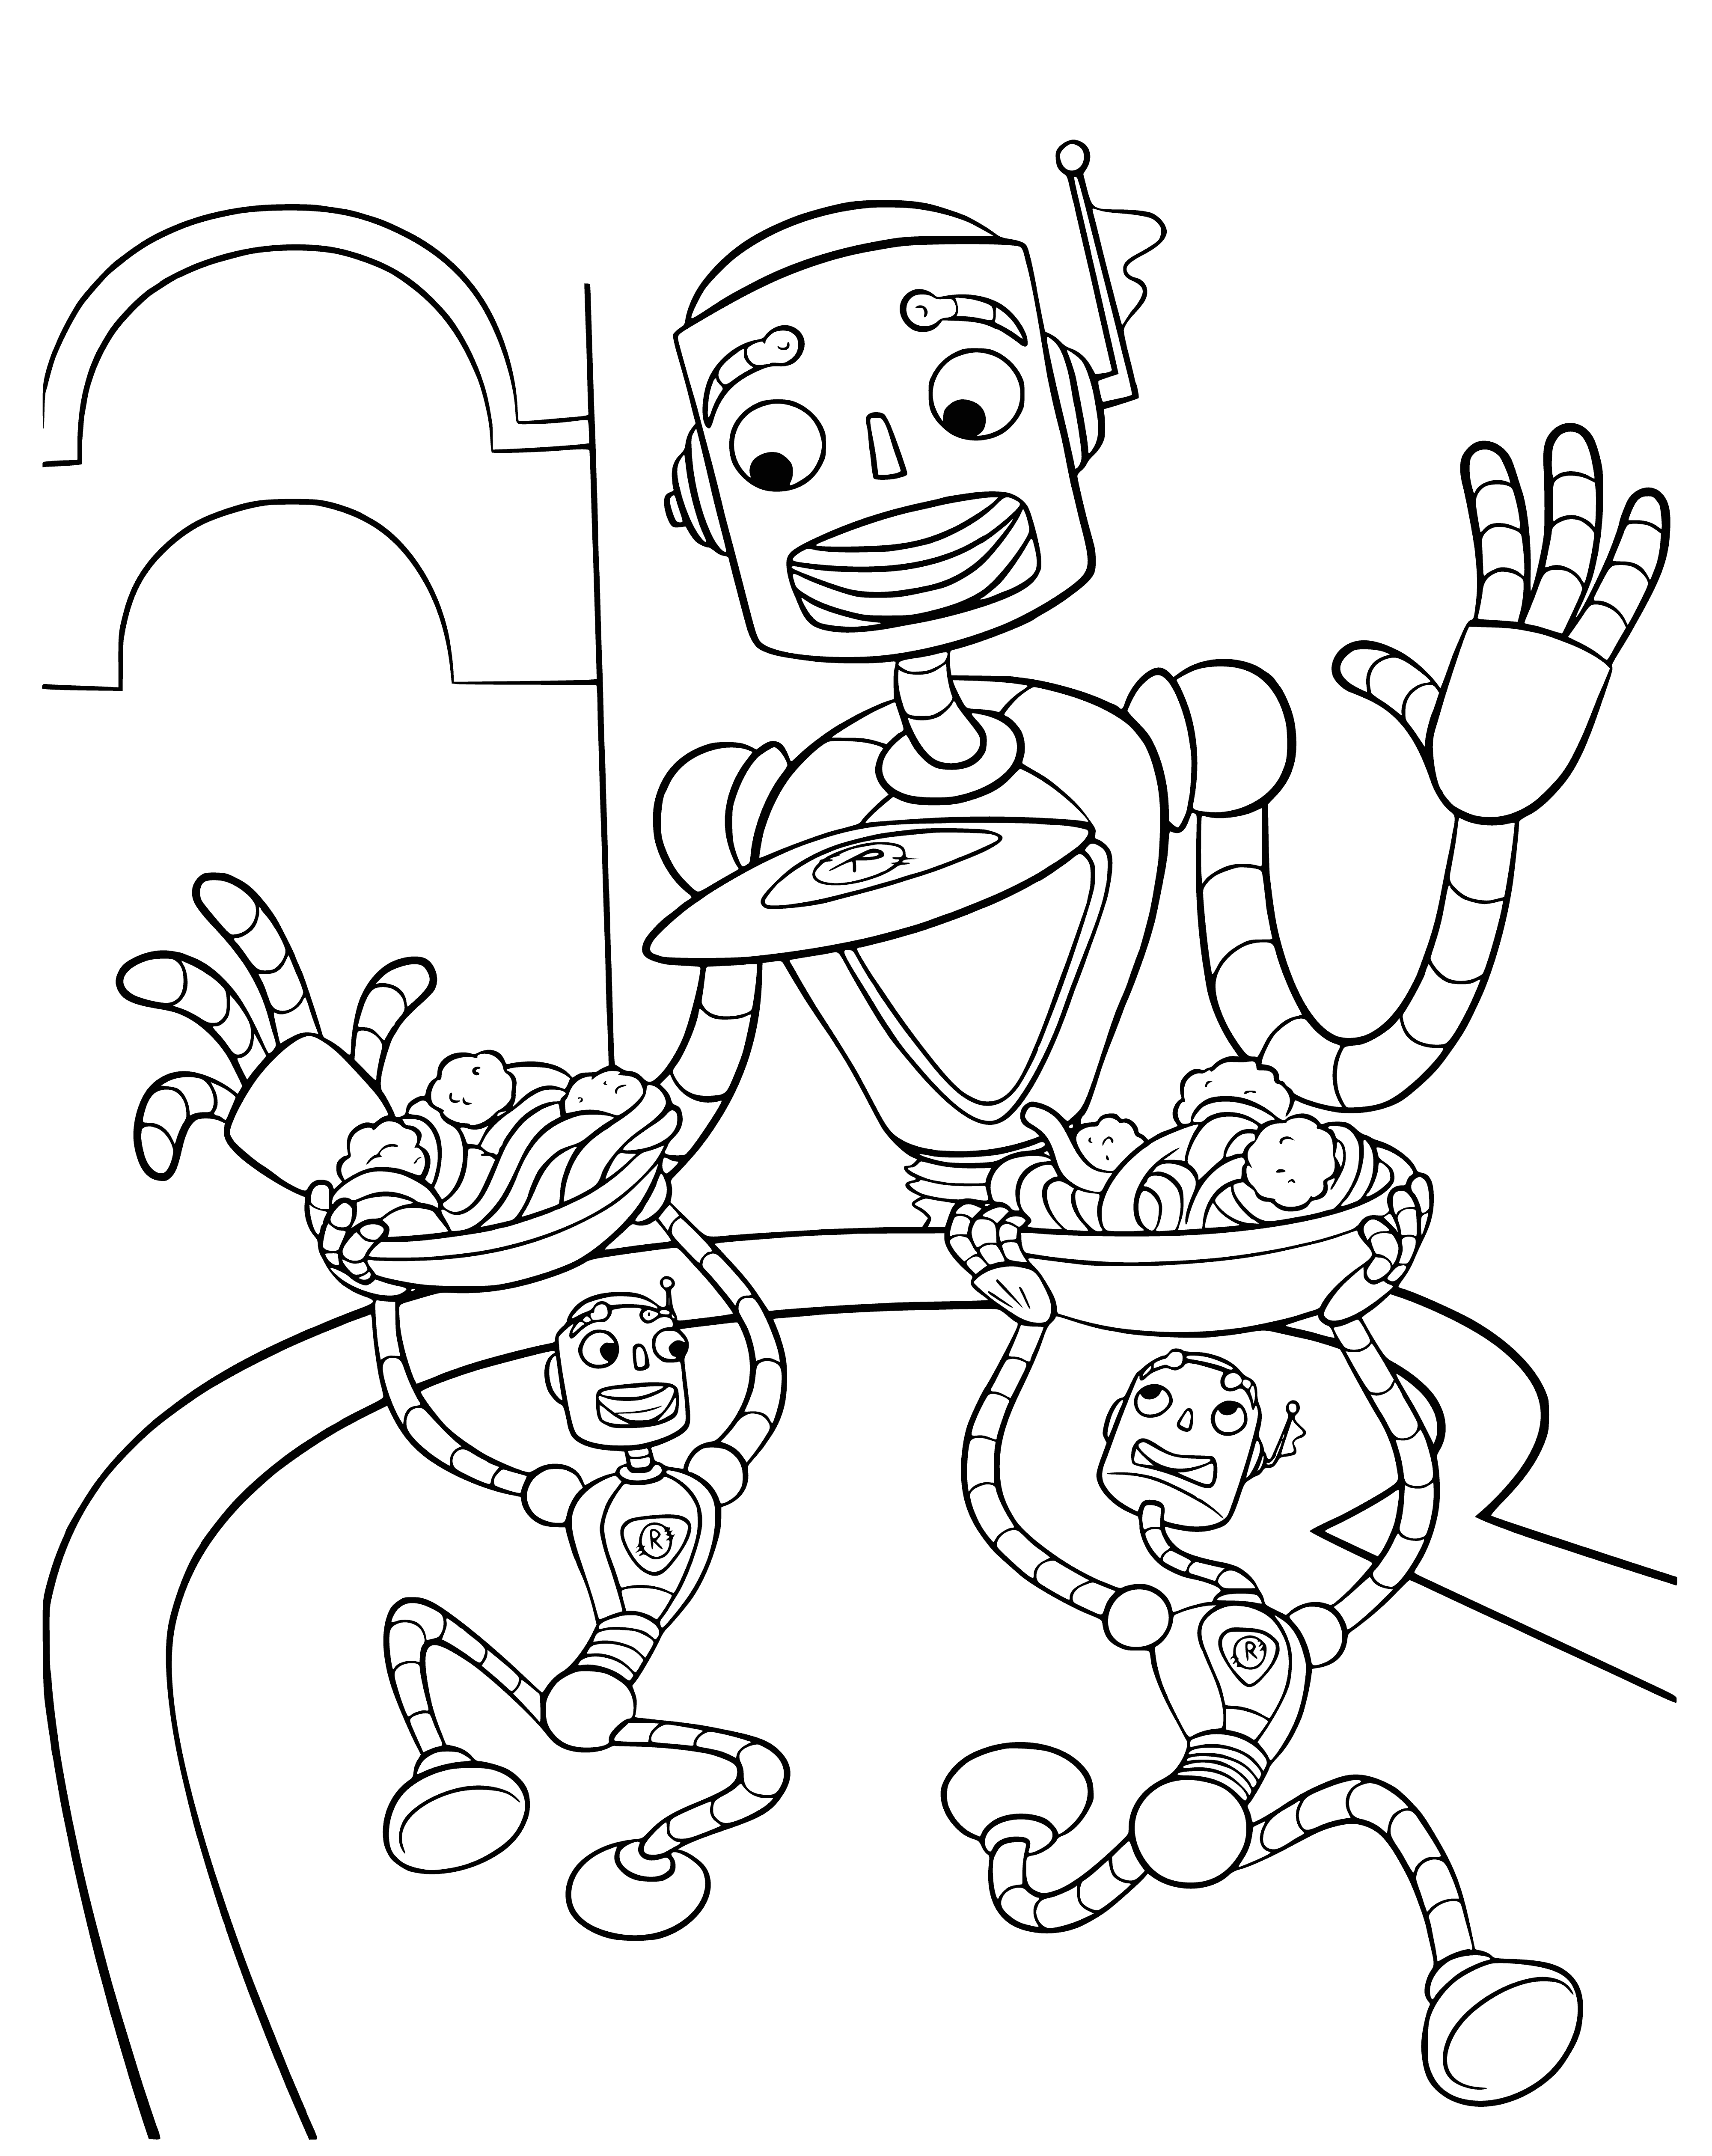 coloring page: Robots working hard to complete a task efficiently and organized, under the orders of a large robot in the center. #MeetTheRobinsons #Robots